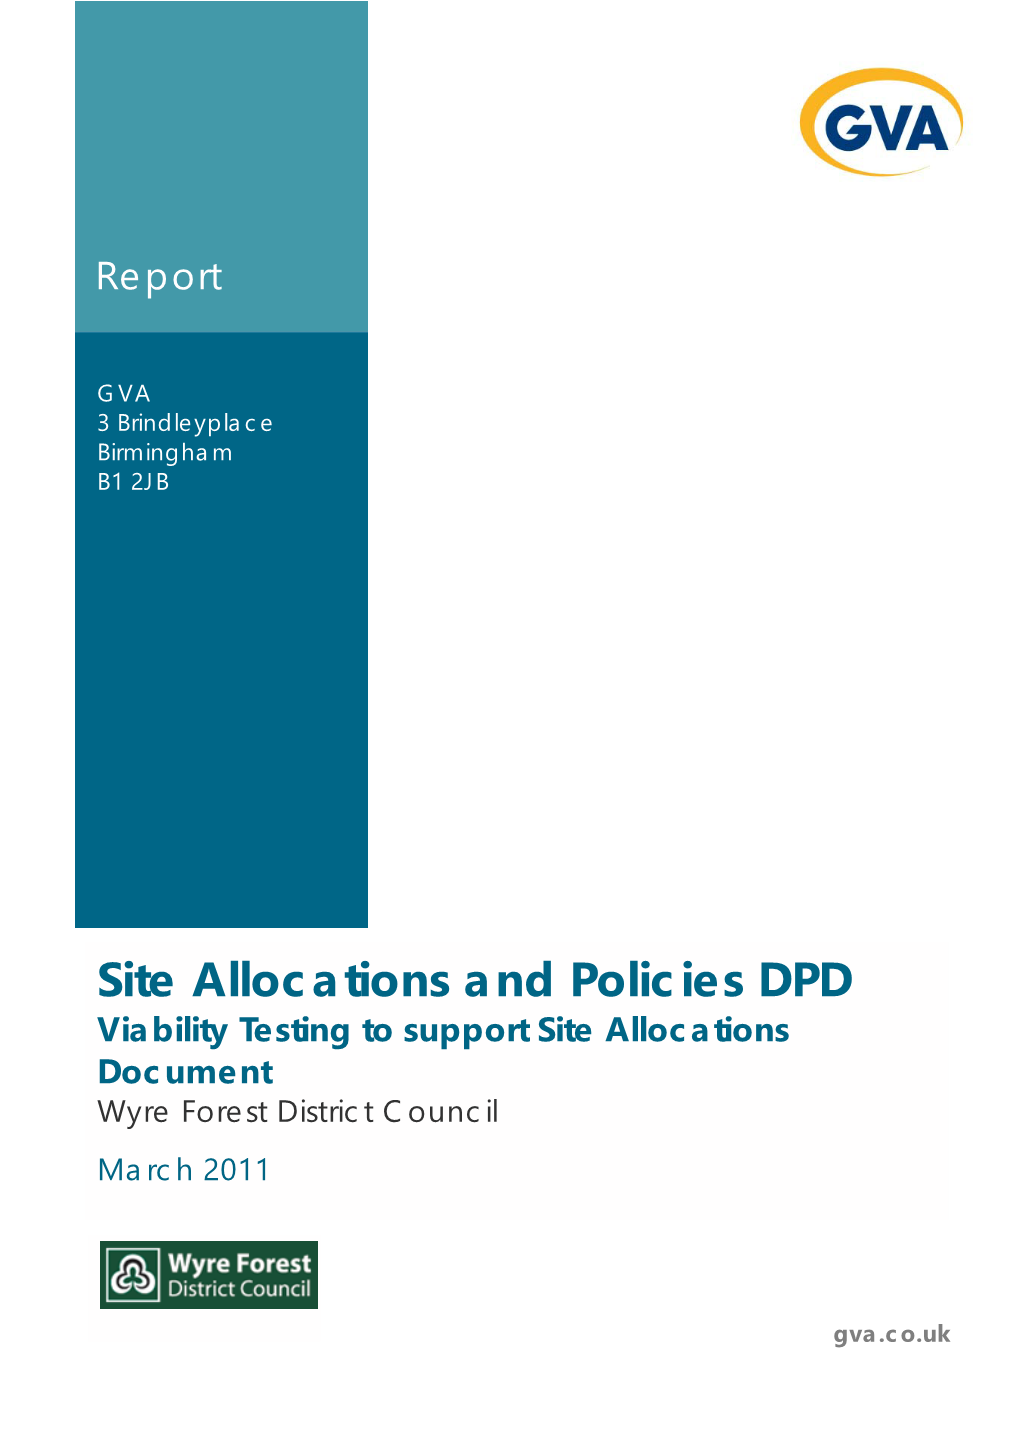 Site Allocations and Policies DPD Viability Testing to Support Site Allocations